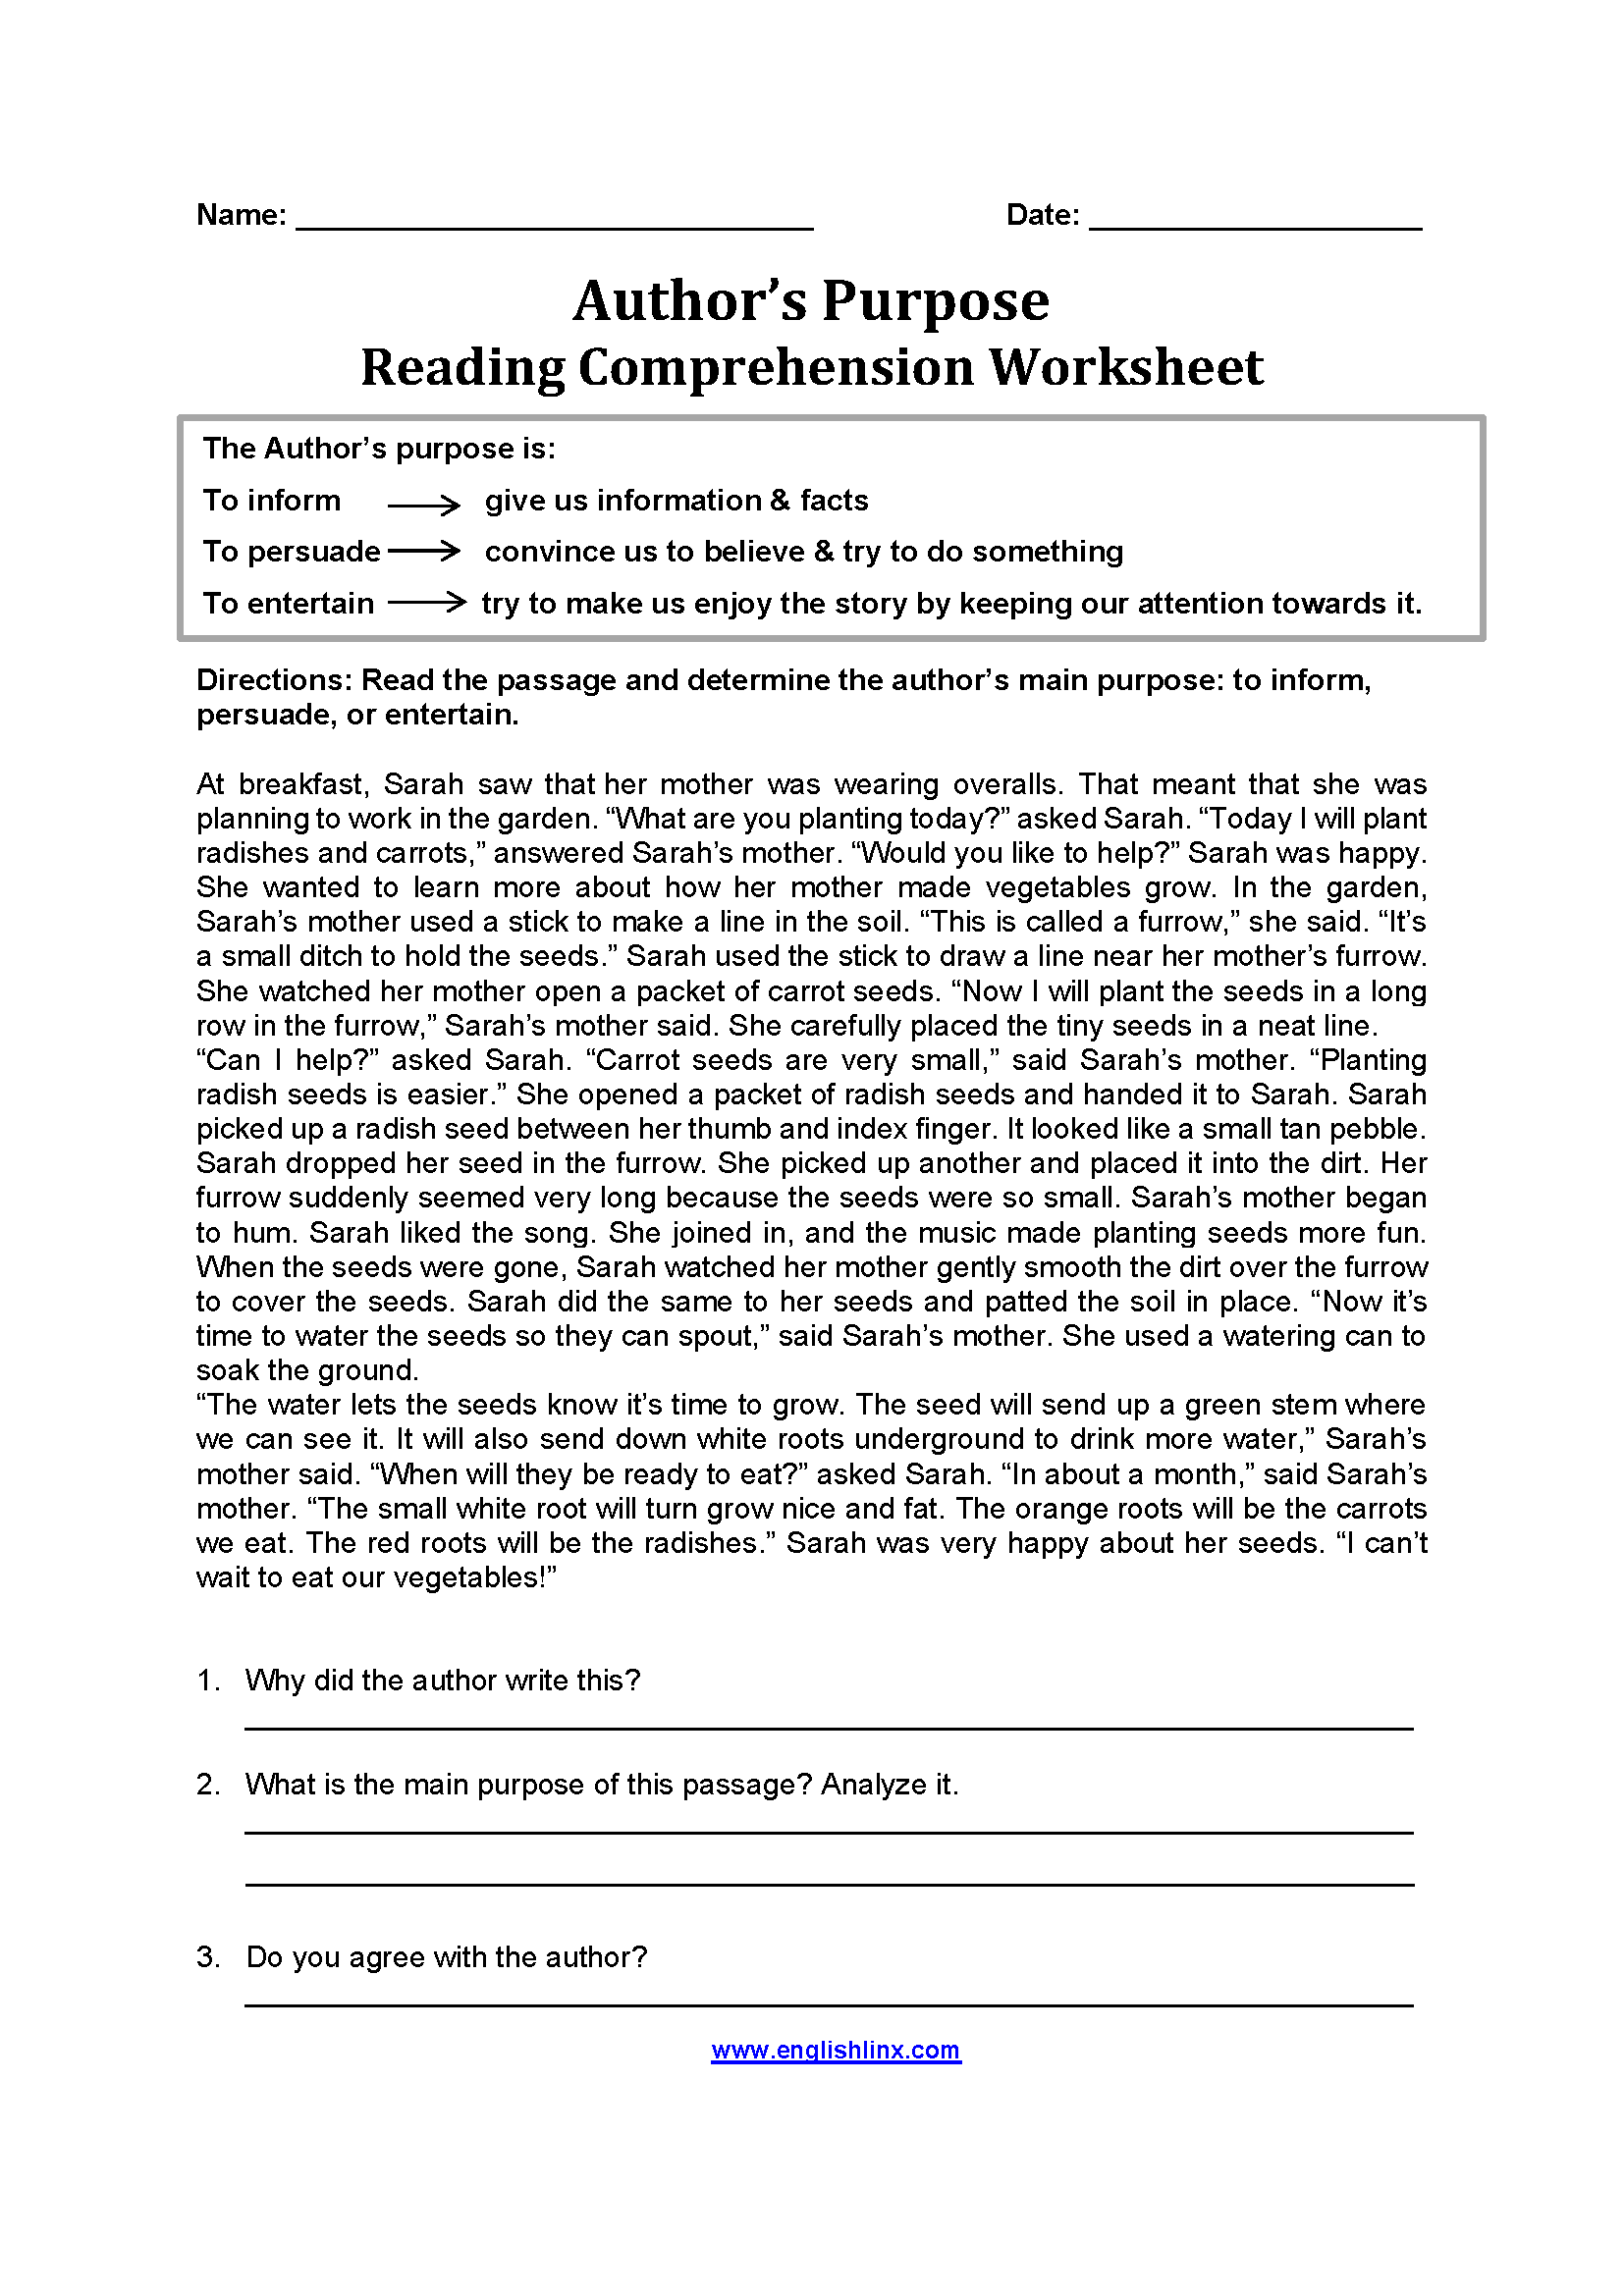 Reading Comprehension Author's Purpose Worksheets